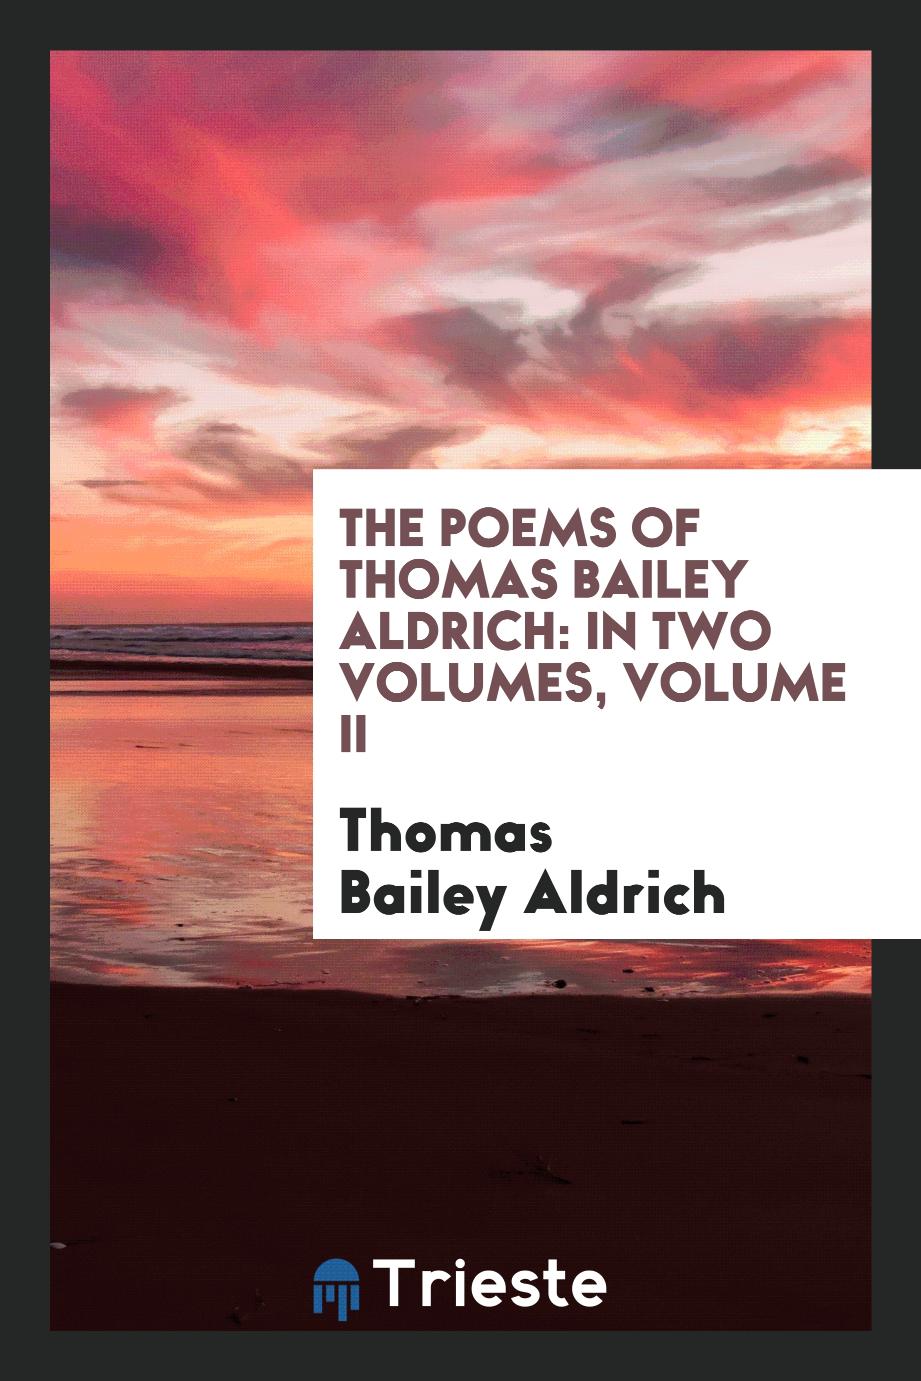 The Poems of Thomas Bailey Aldrich: In Two Volumes, Volume II